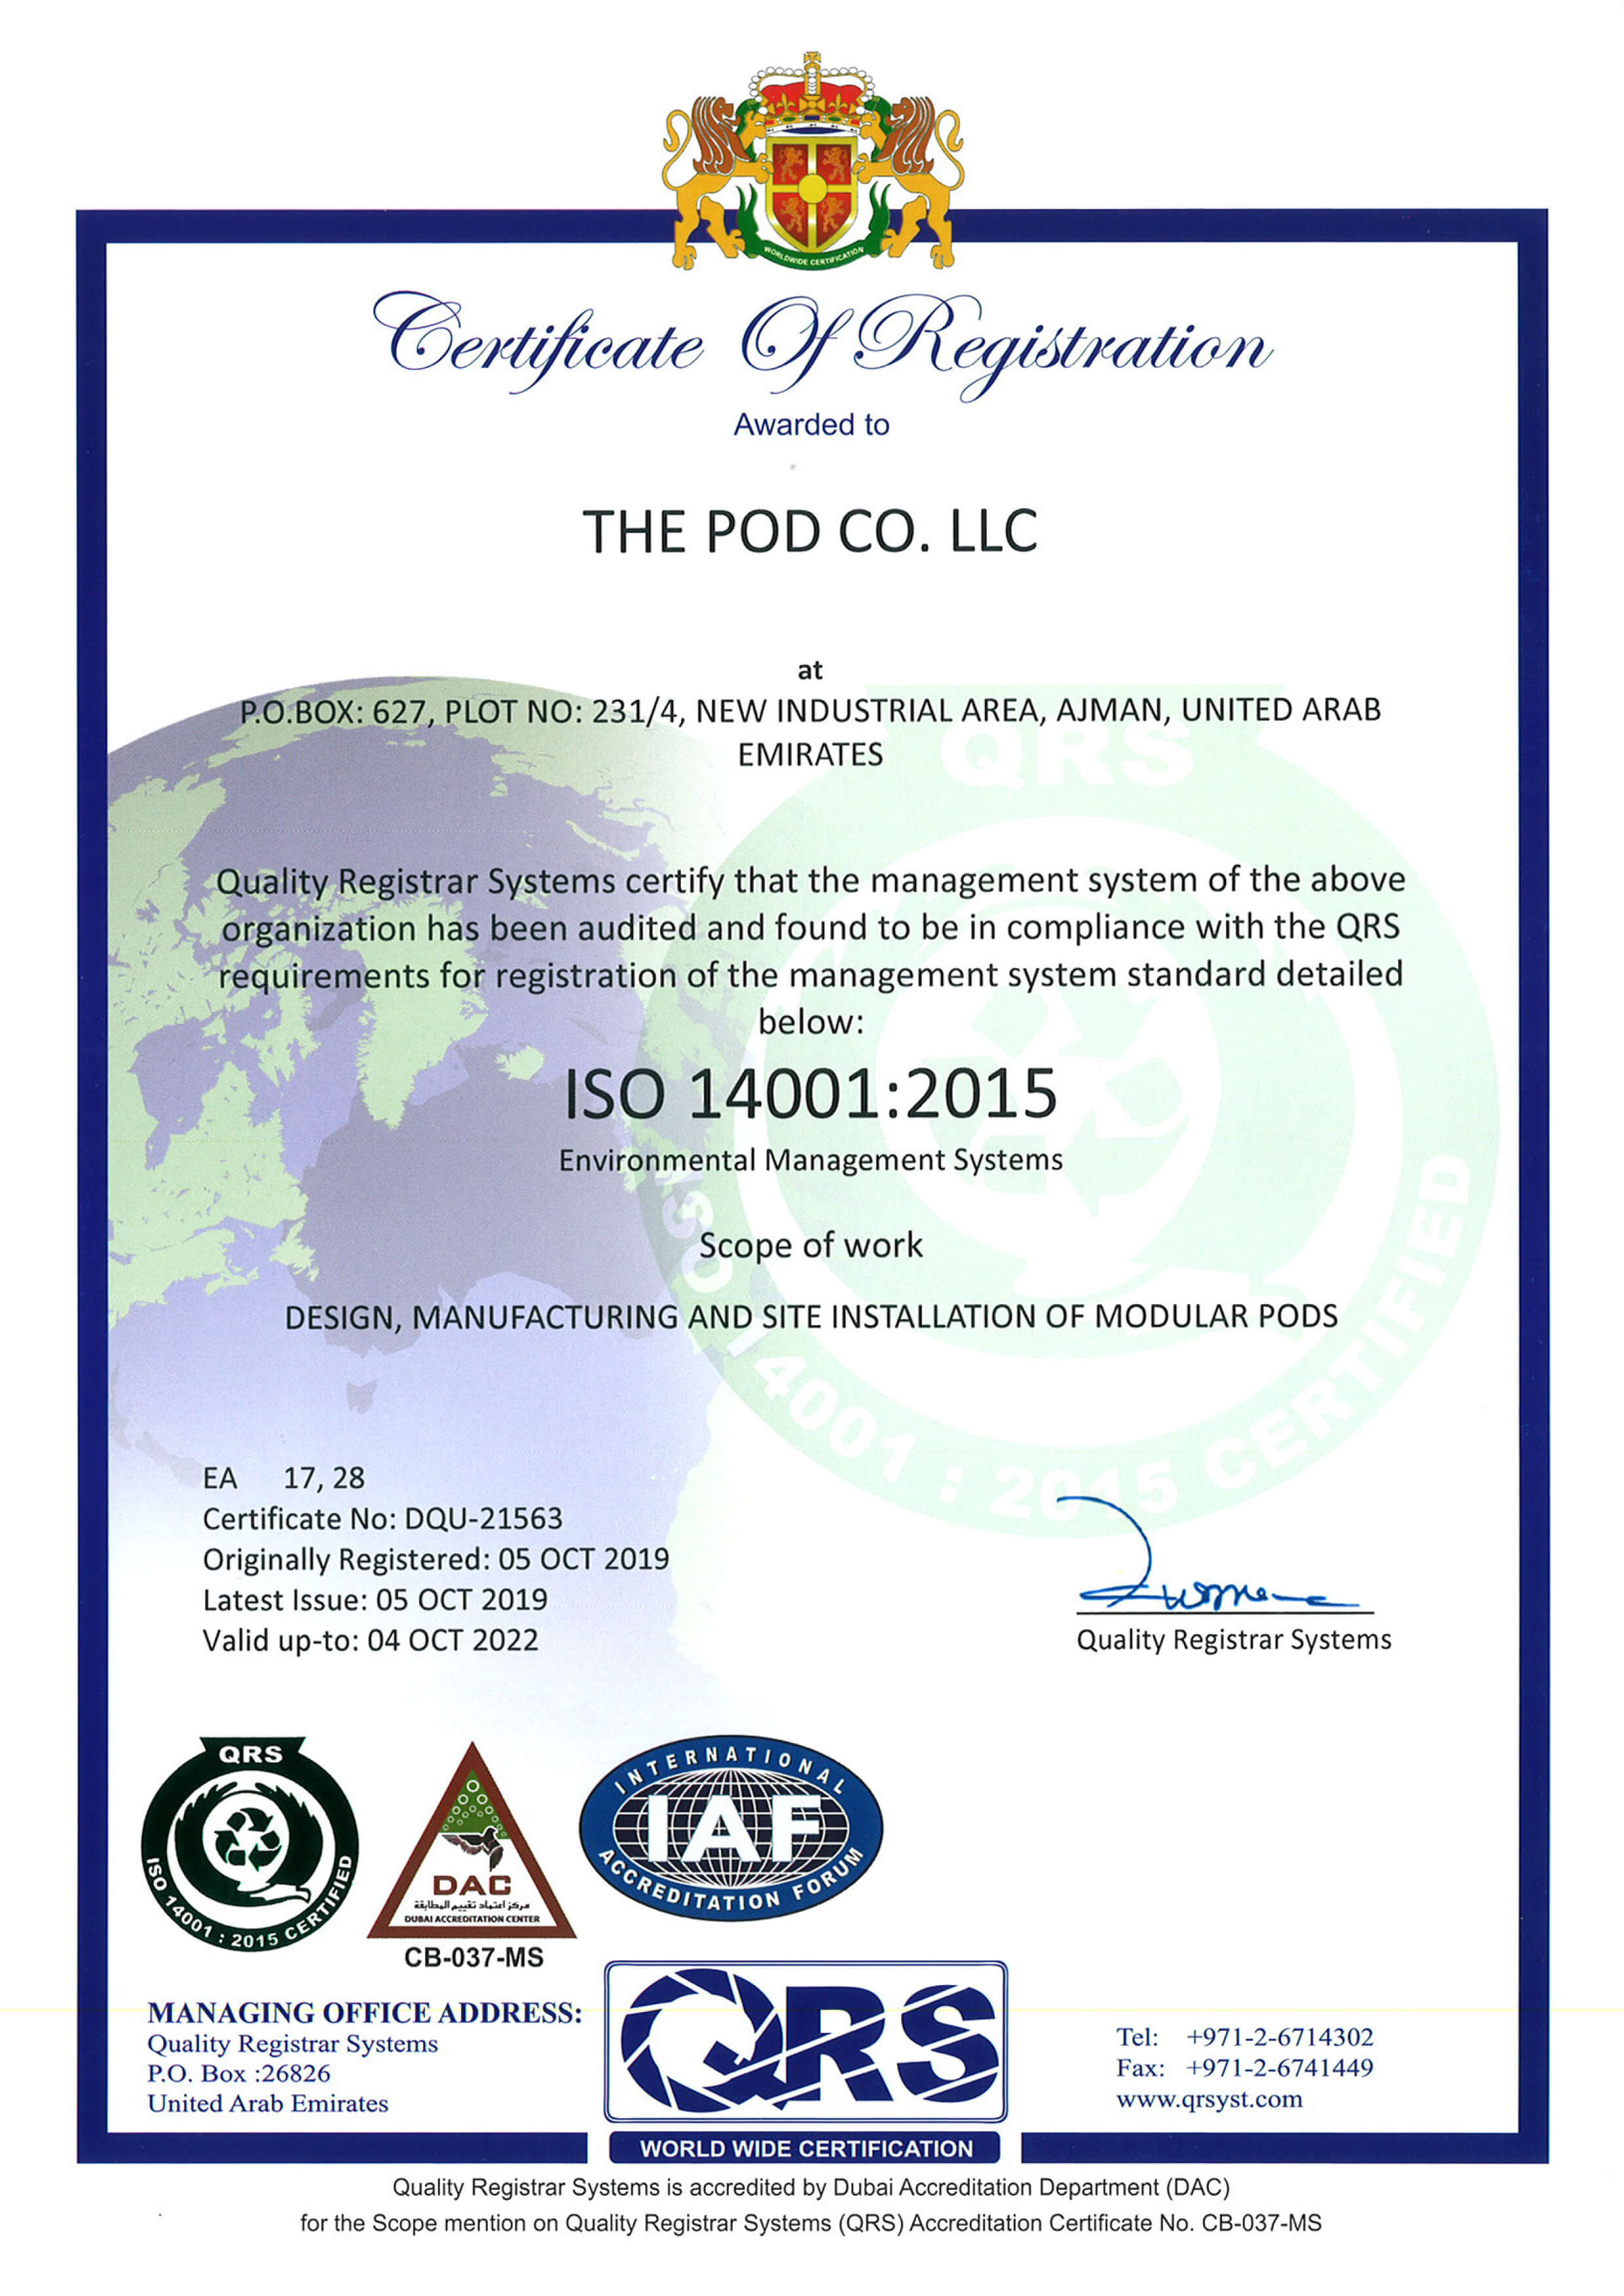 The pod Company ISO 14001 Certificate